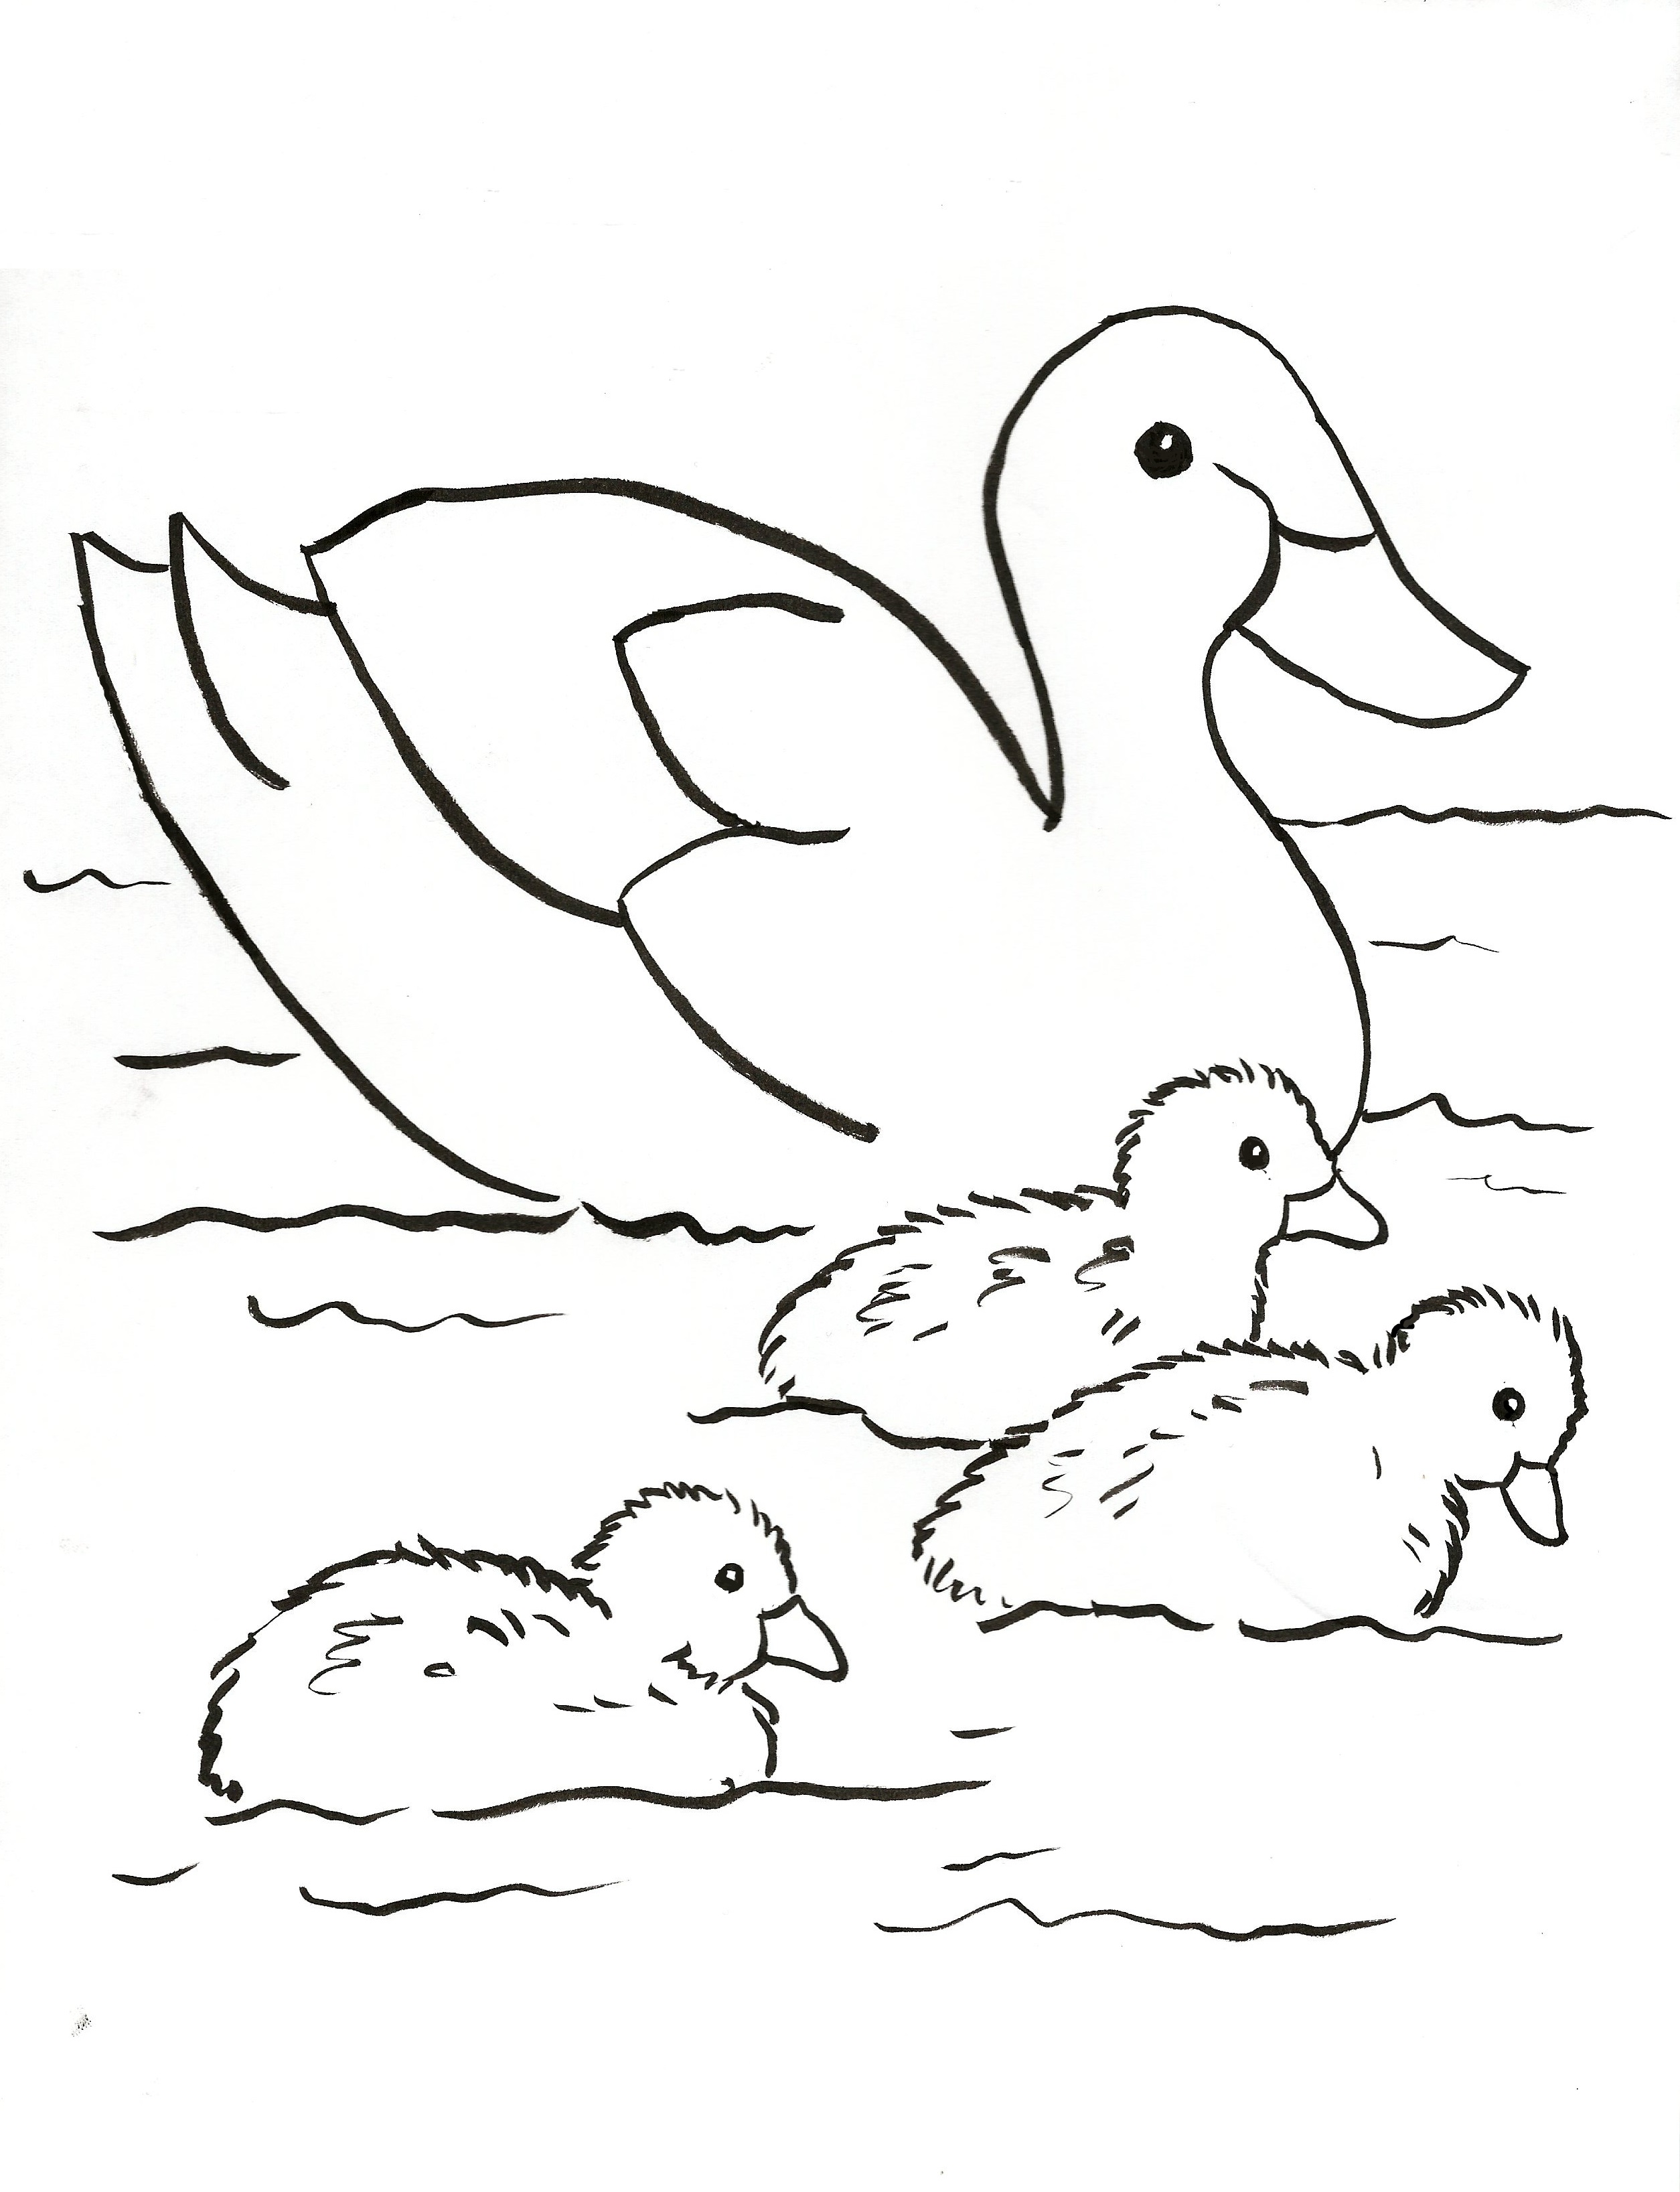 Duck Family Coloring Page Art Starts for Kids